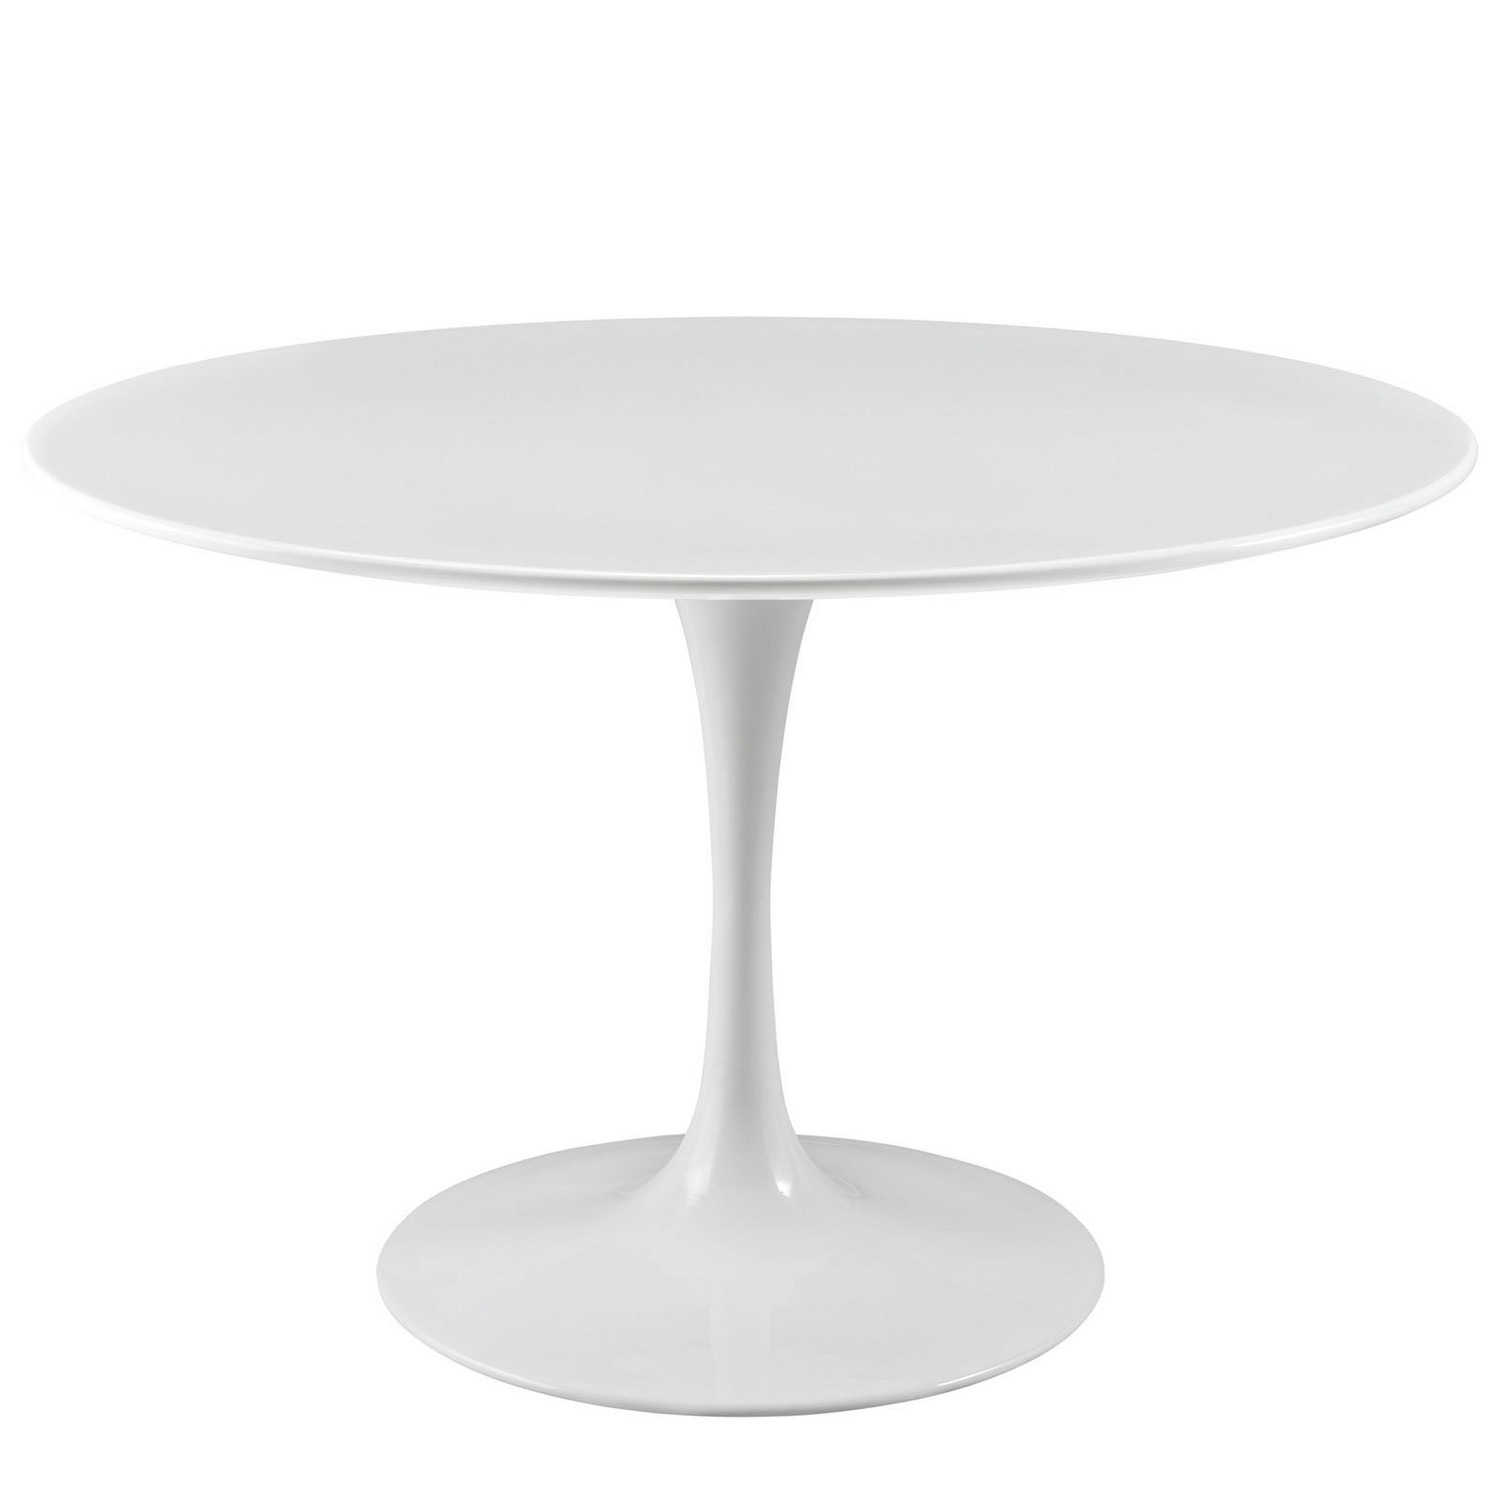 Modway Lippa 47 Wood Top Dining Table - White